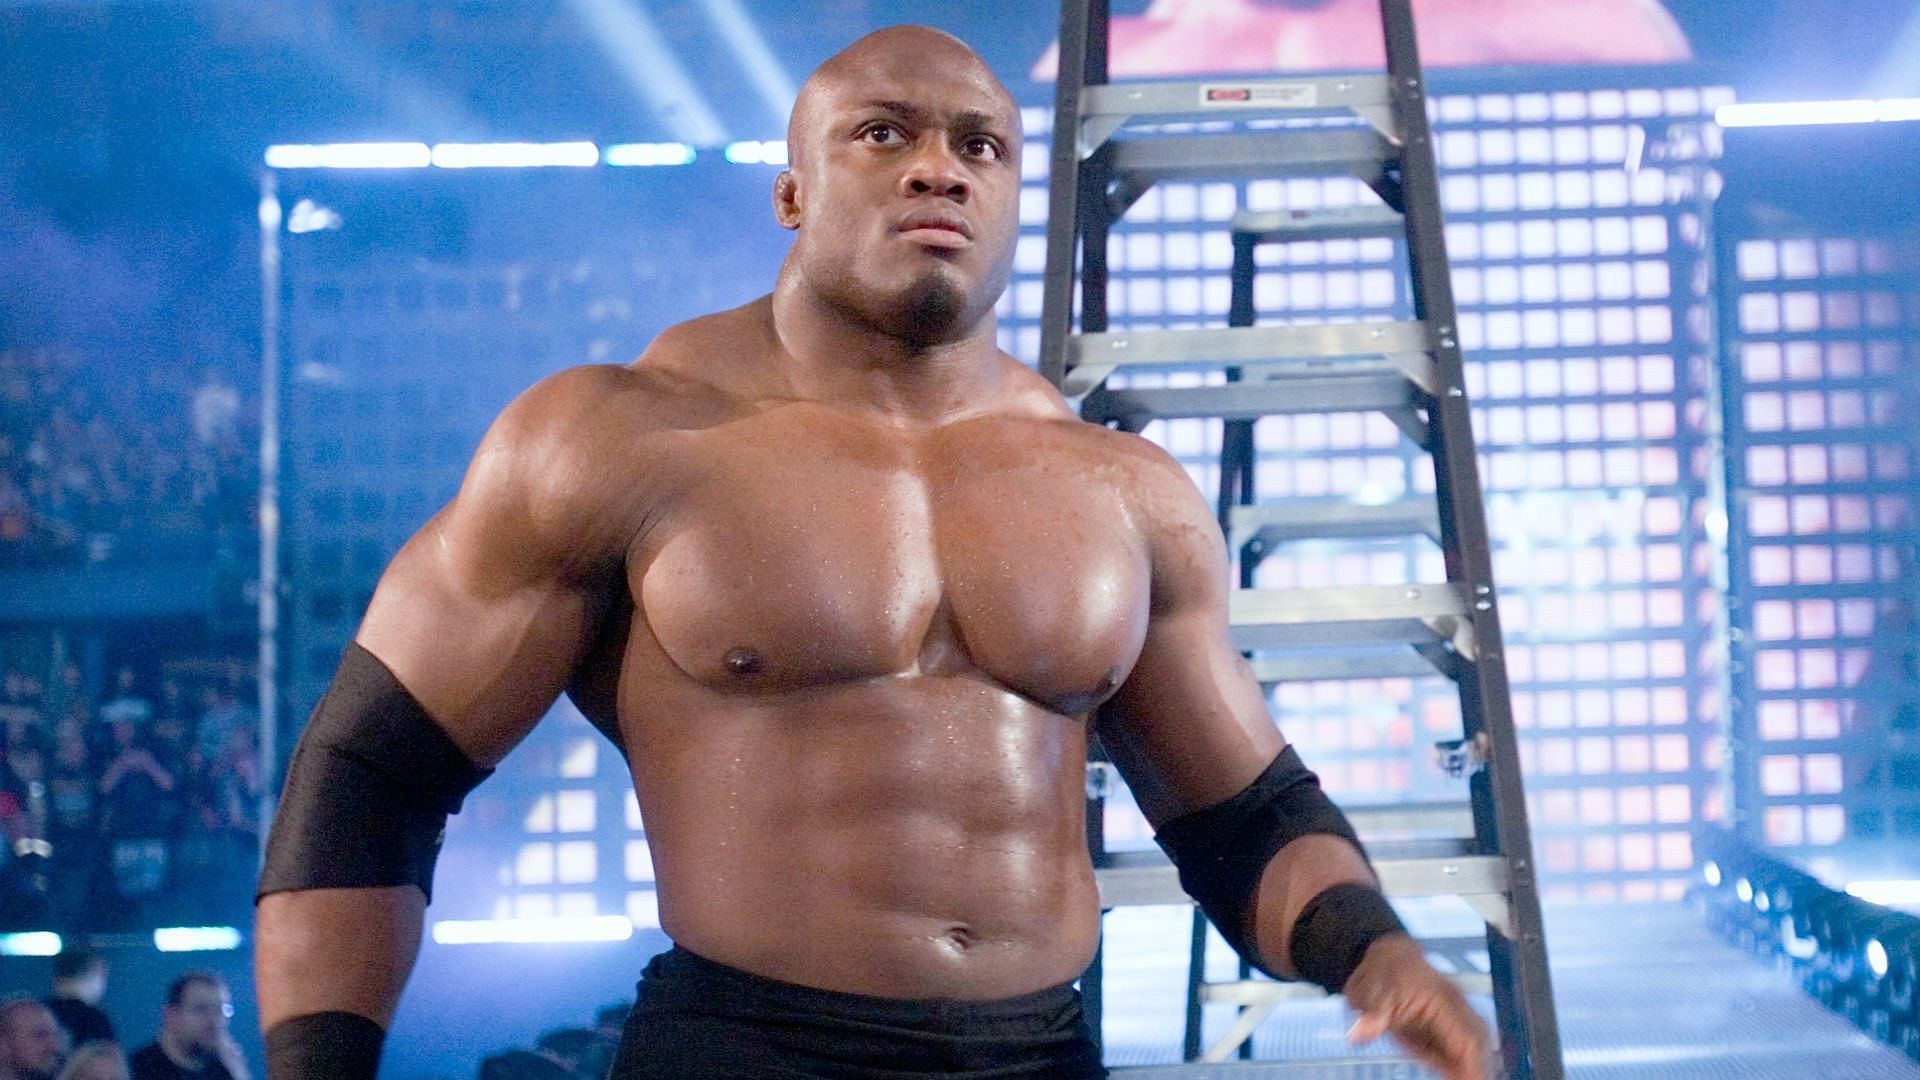 The All Mighty was part of the 2nd-ever MITB match at WrestleMania 22